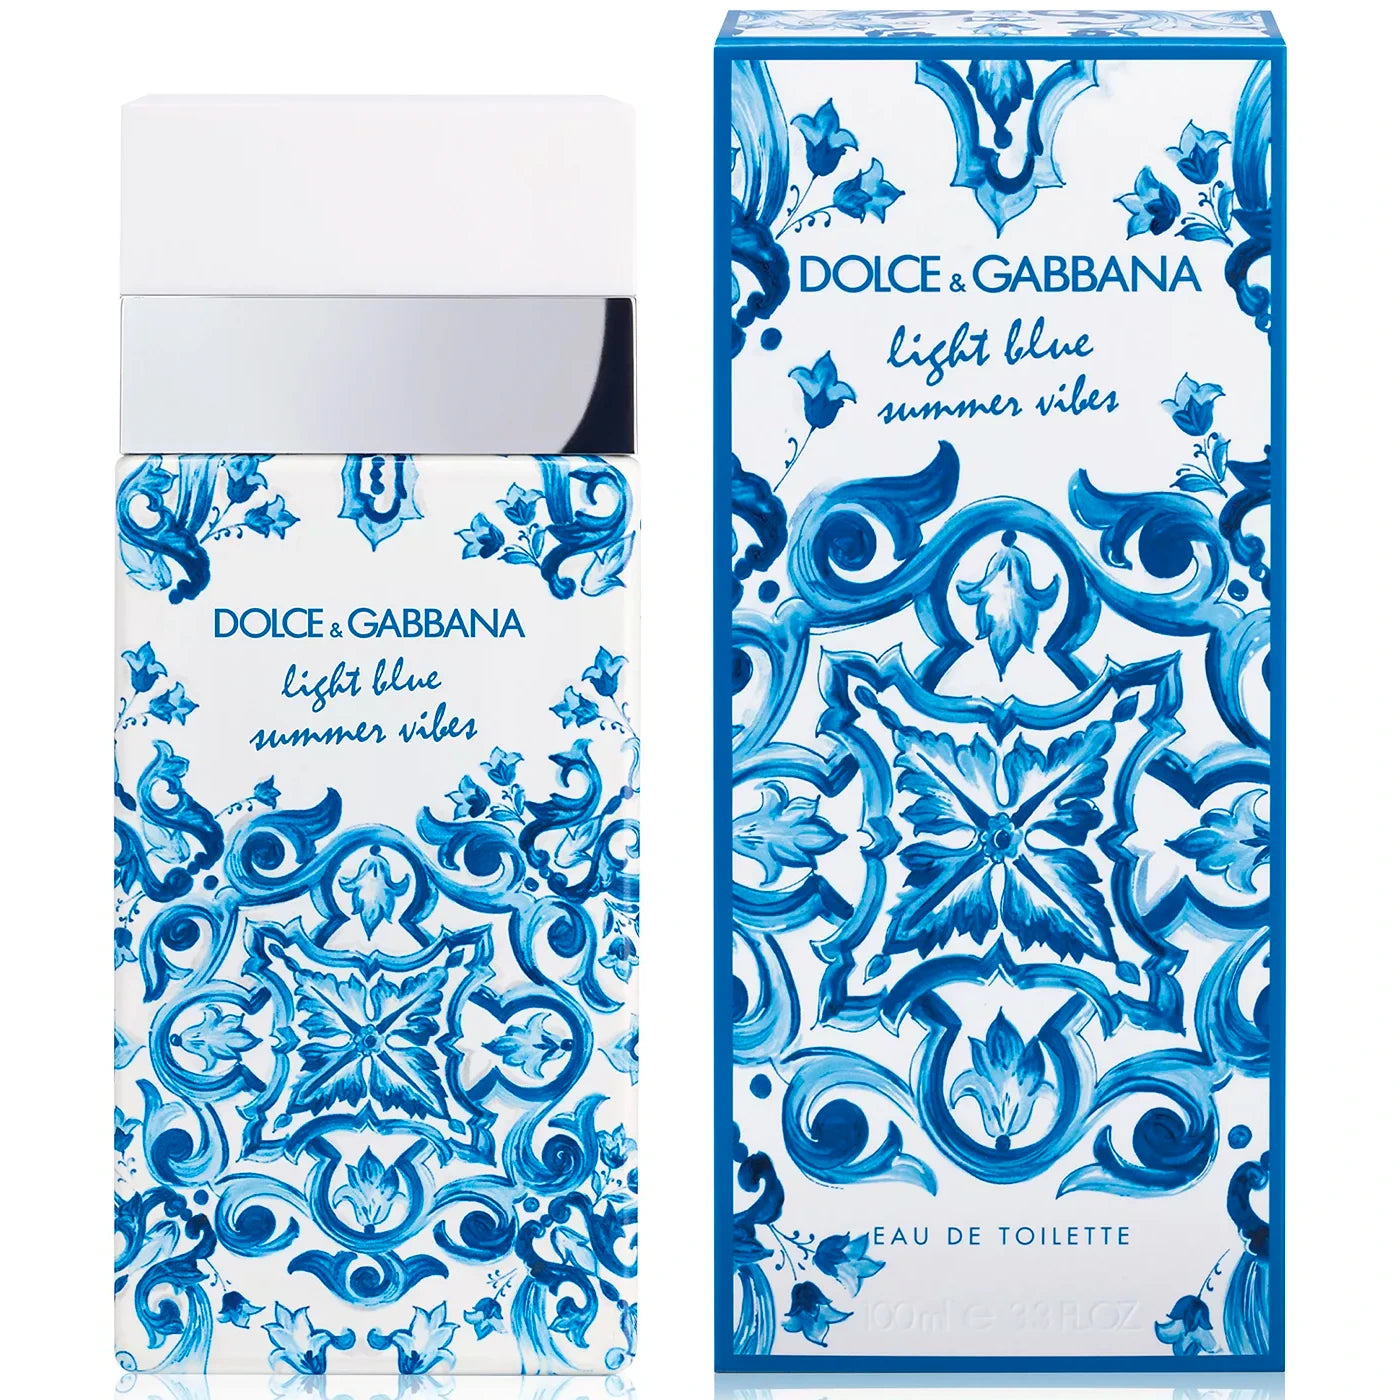 <p data-auto="product-description" class="c-small-font c-margin-bottom-2v description" itemprop="description">The limited-edition DOLCE&amp;GABBANA Light Blue Summer Vibes captures the dream of a romantic escape to Capri. The iconic Light Blue fragrance is tinged with the fresh touch of Calabrian bergamot, the sweetness of fruits and the soothing touch of woody notes.</p>
<ul data-auto="product-description-bullets" class="c-small-font c-margin-bottom-7v bullets-section">
<li>FRAGRANCE FAMILY: Woody Fruity</li>
<li>KEY NOTES: Bergamot (sparkling and persistent), Peach (sweet and juicy), Cedarwood (intense and mysterious)</li>
</ul>